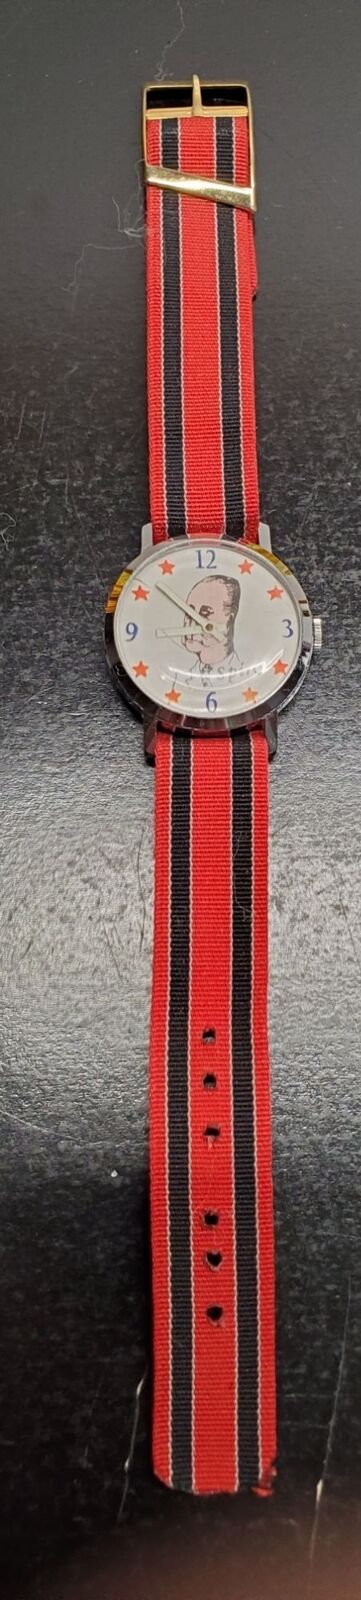 Vintage Spiro Agnew Character Wrist Watch - Untested